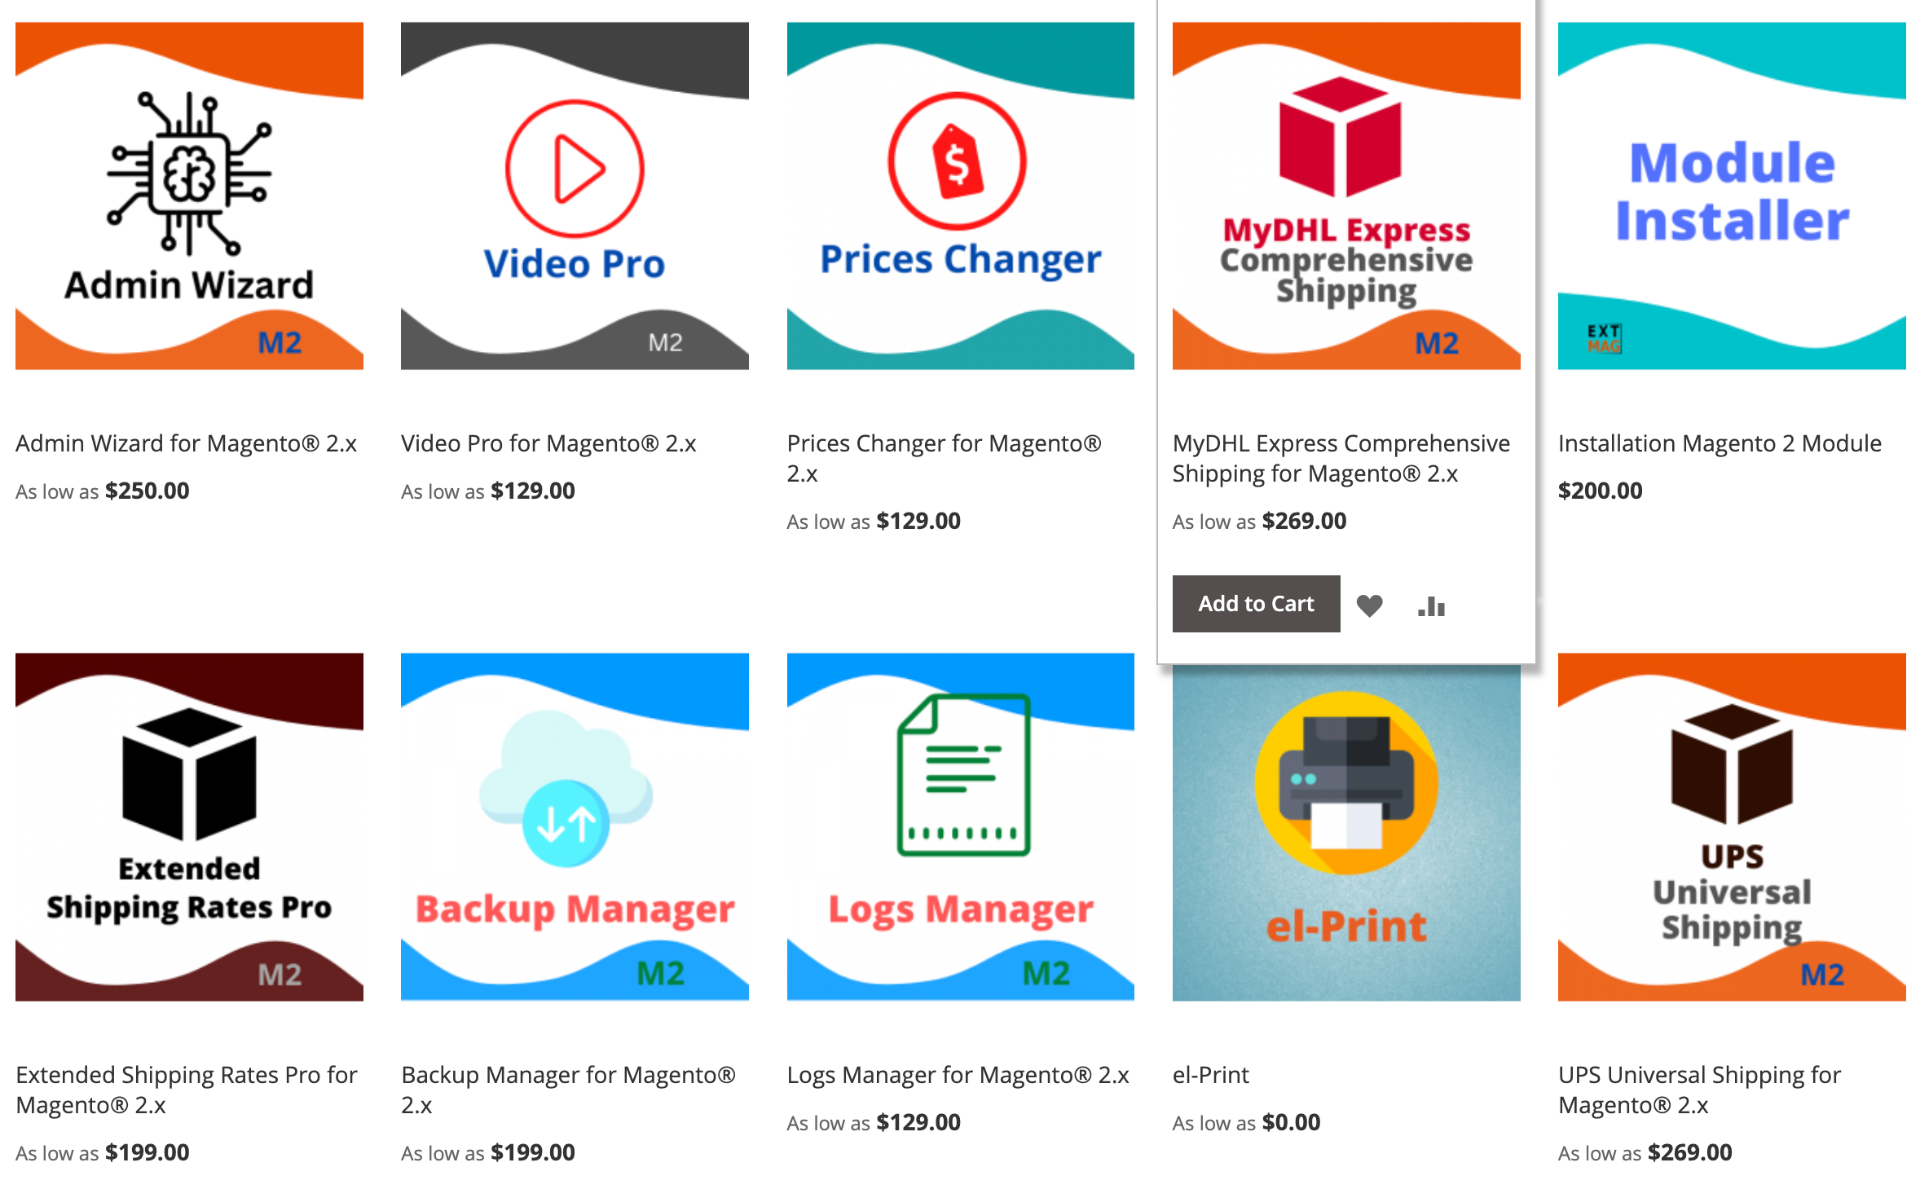 "Featured Products" on the Magento homepage